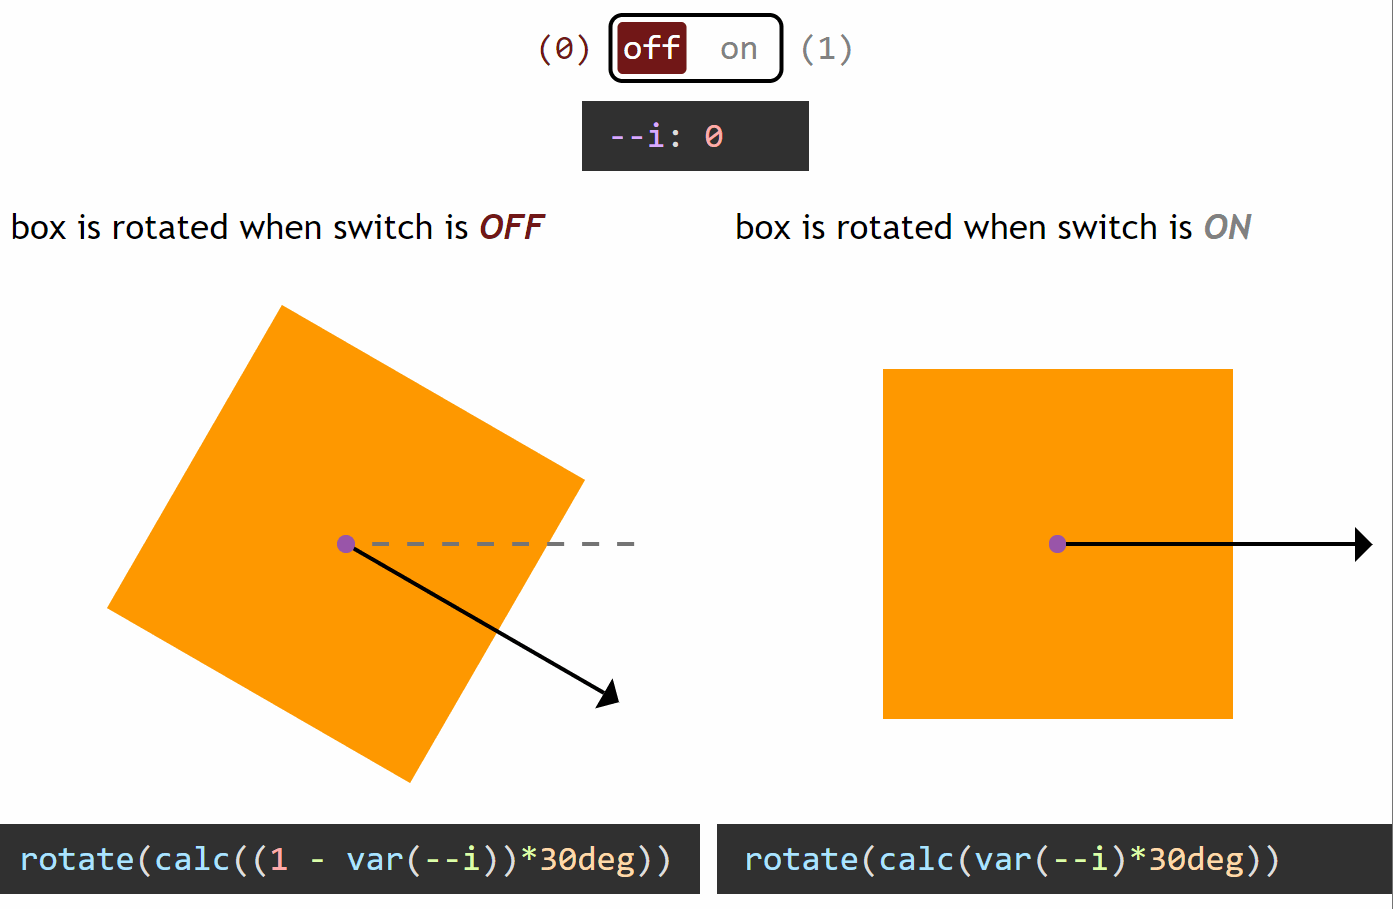 Animated gif. Shows how changing the switch value from 0 to 1 changes the rotation of two boxes. The first box is rotated to 30deg when the switch is off (its value is 0) and not rotated or rotated to 0deg when the switch is on (its value is 1). This means we have a rotation value of calc((1 - var(--i))*30deg), where --i is the switch value. The second box is not rotated or rotated to 0deg when the switch is off (its value is 0) and rotated to 30deg when the switch is on (its value is 1). This means we have a rotation value of calc(var(--i)*30deg), with --i being the switch value.